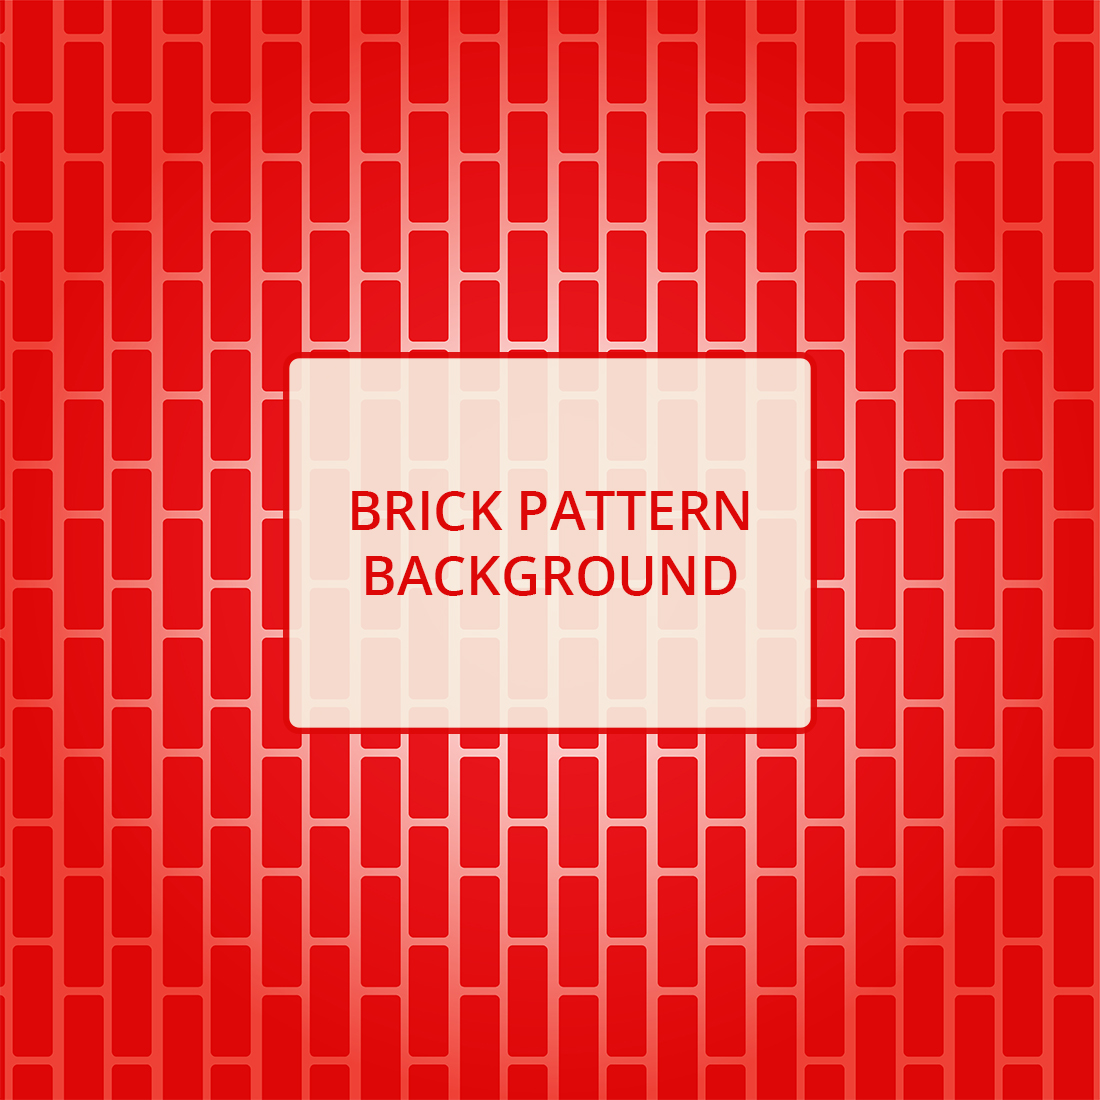 4 Colorful Brick Pattern Background cover image.